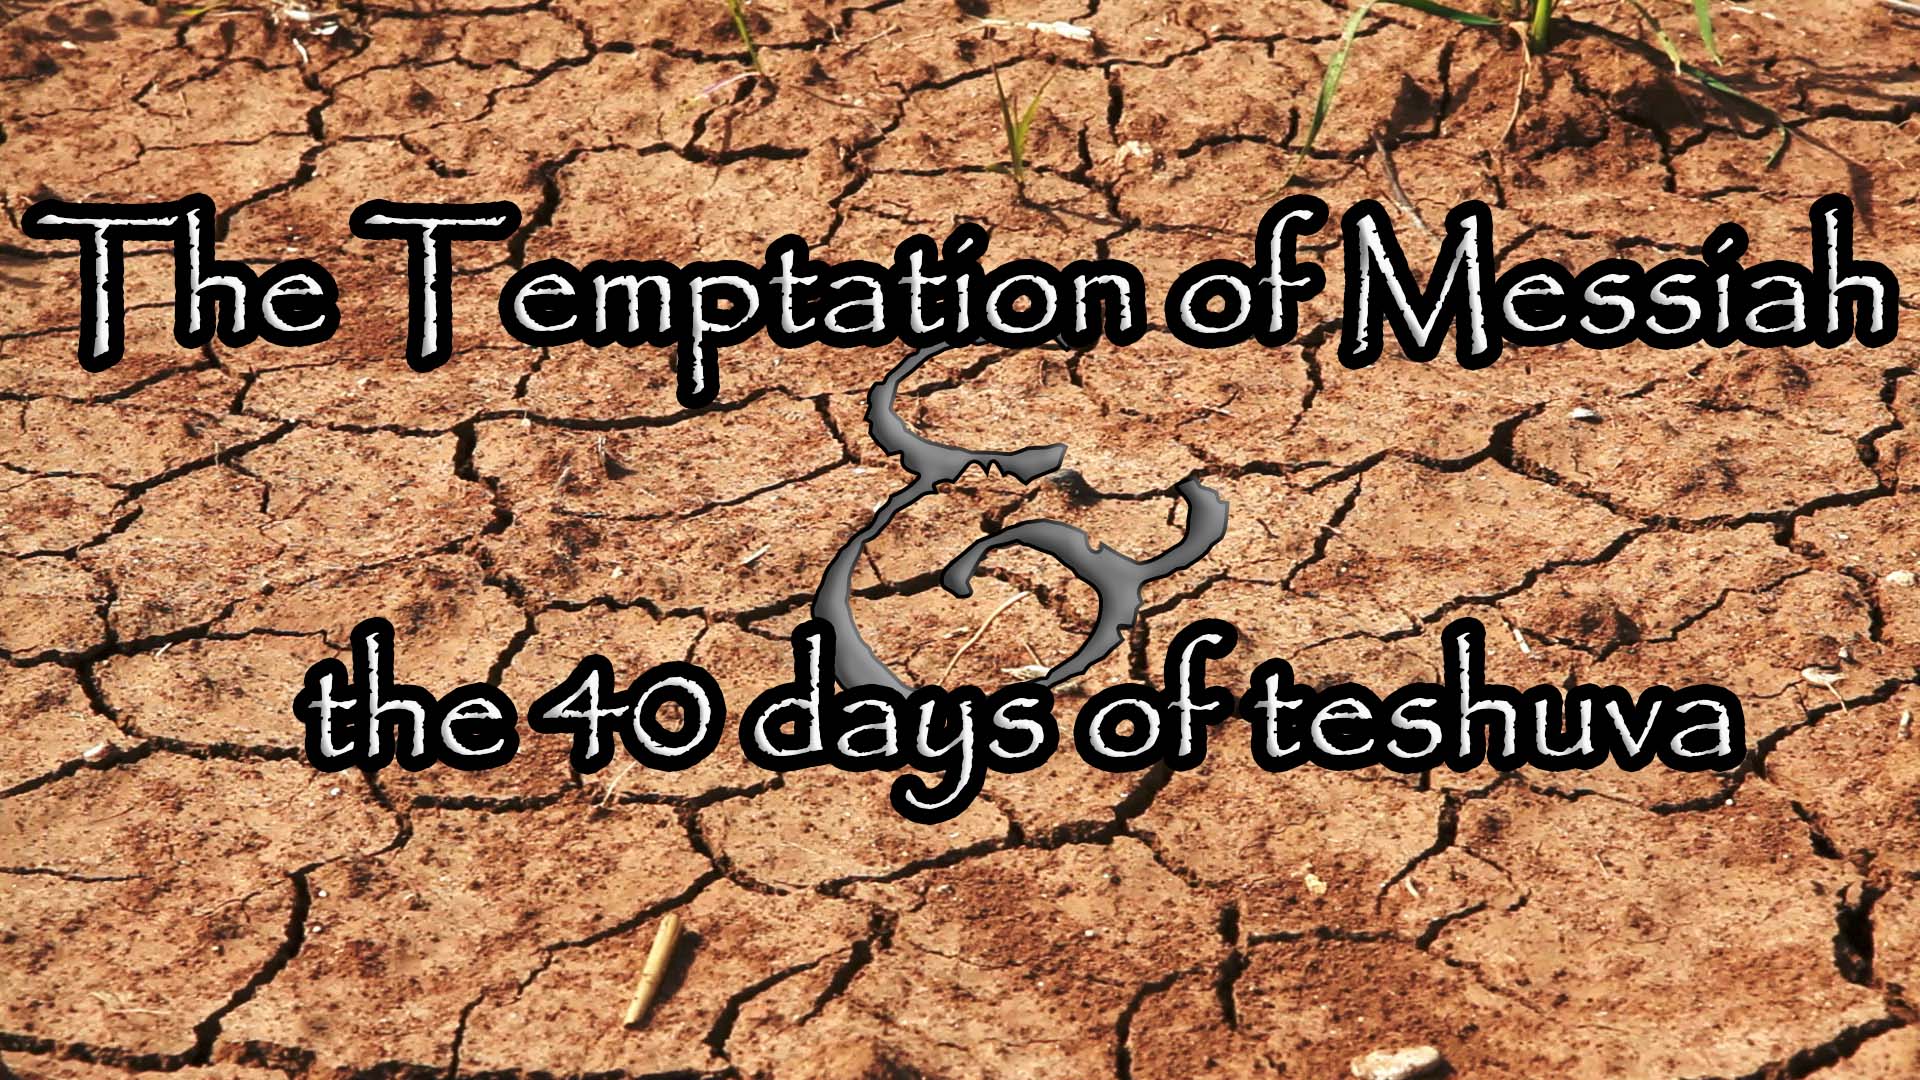 The Forty Days of Teshuva and the Temptation of Messiah The Ancient